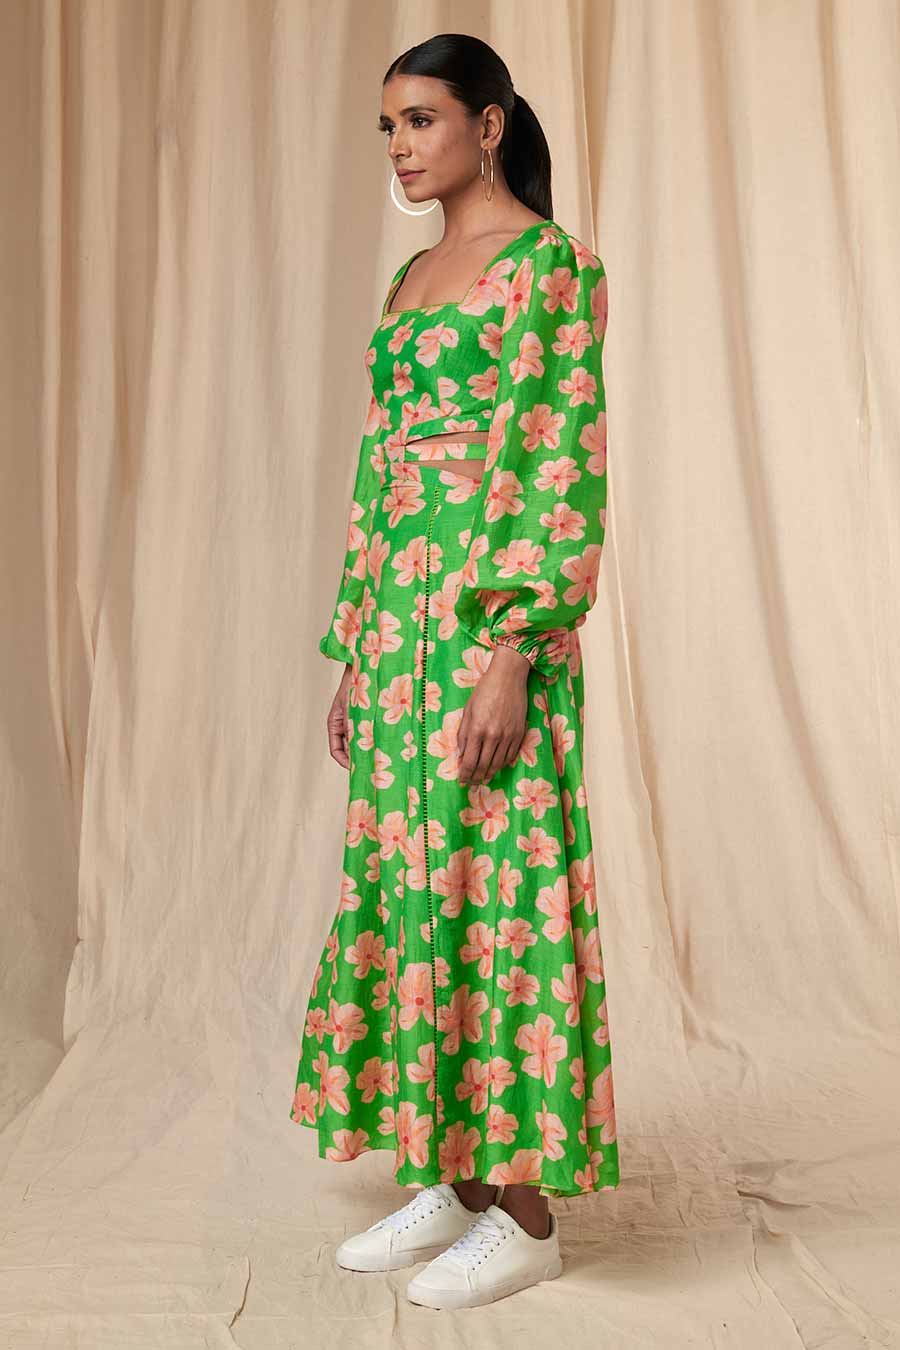 Green Flower Passion Cut-Out Dress